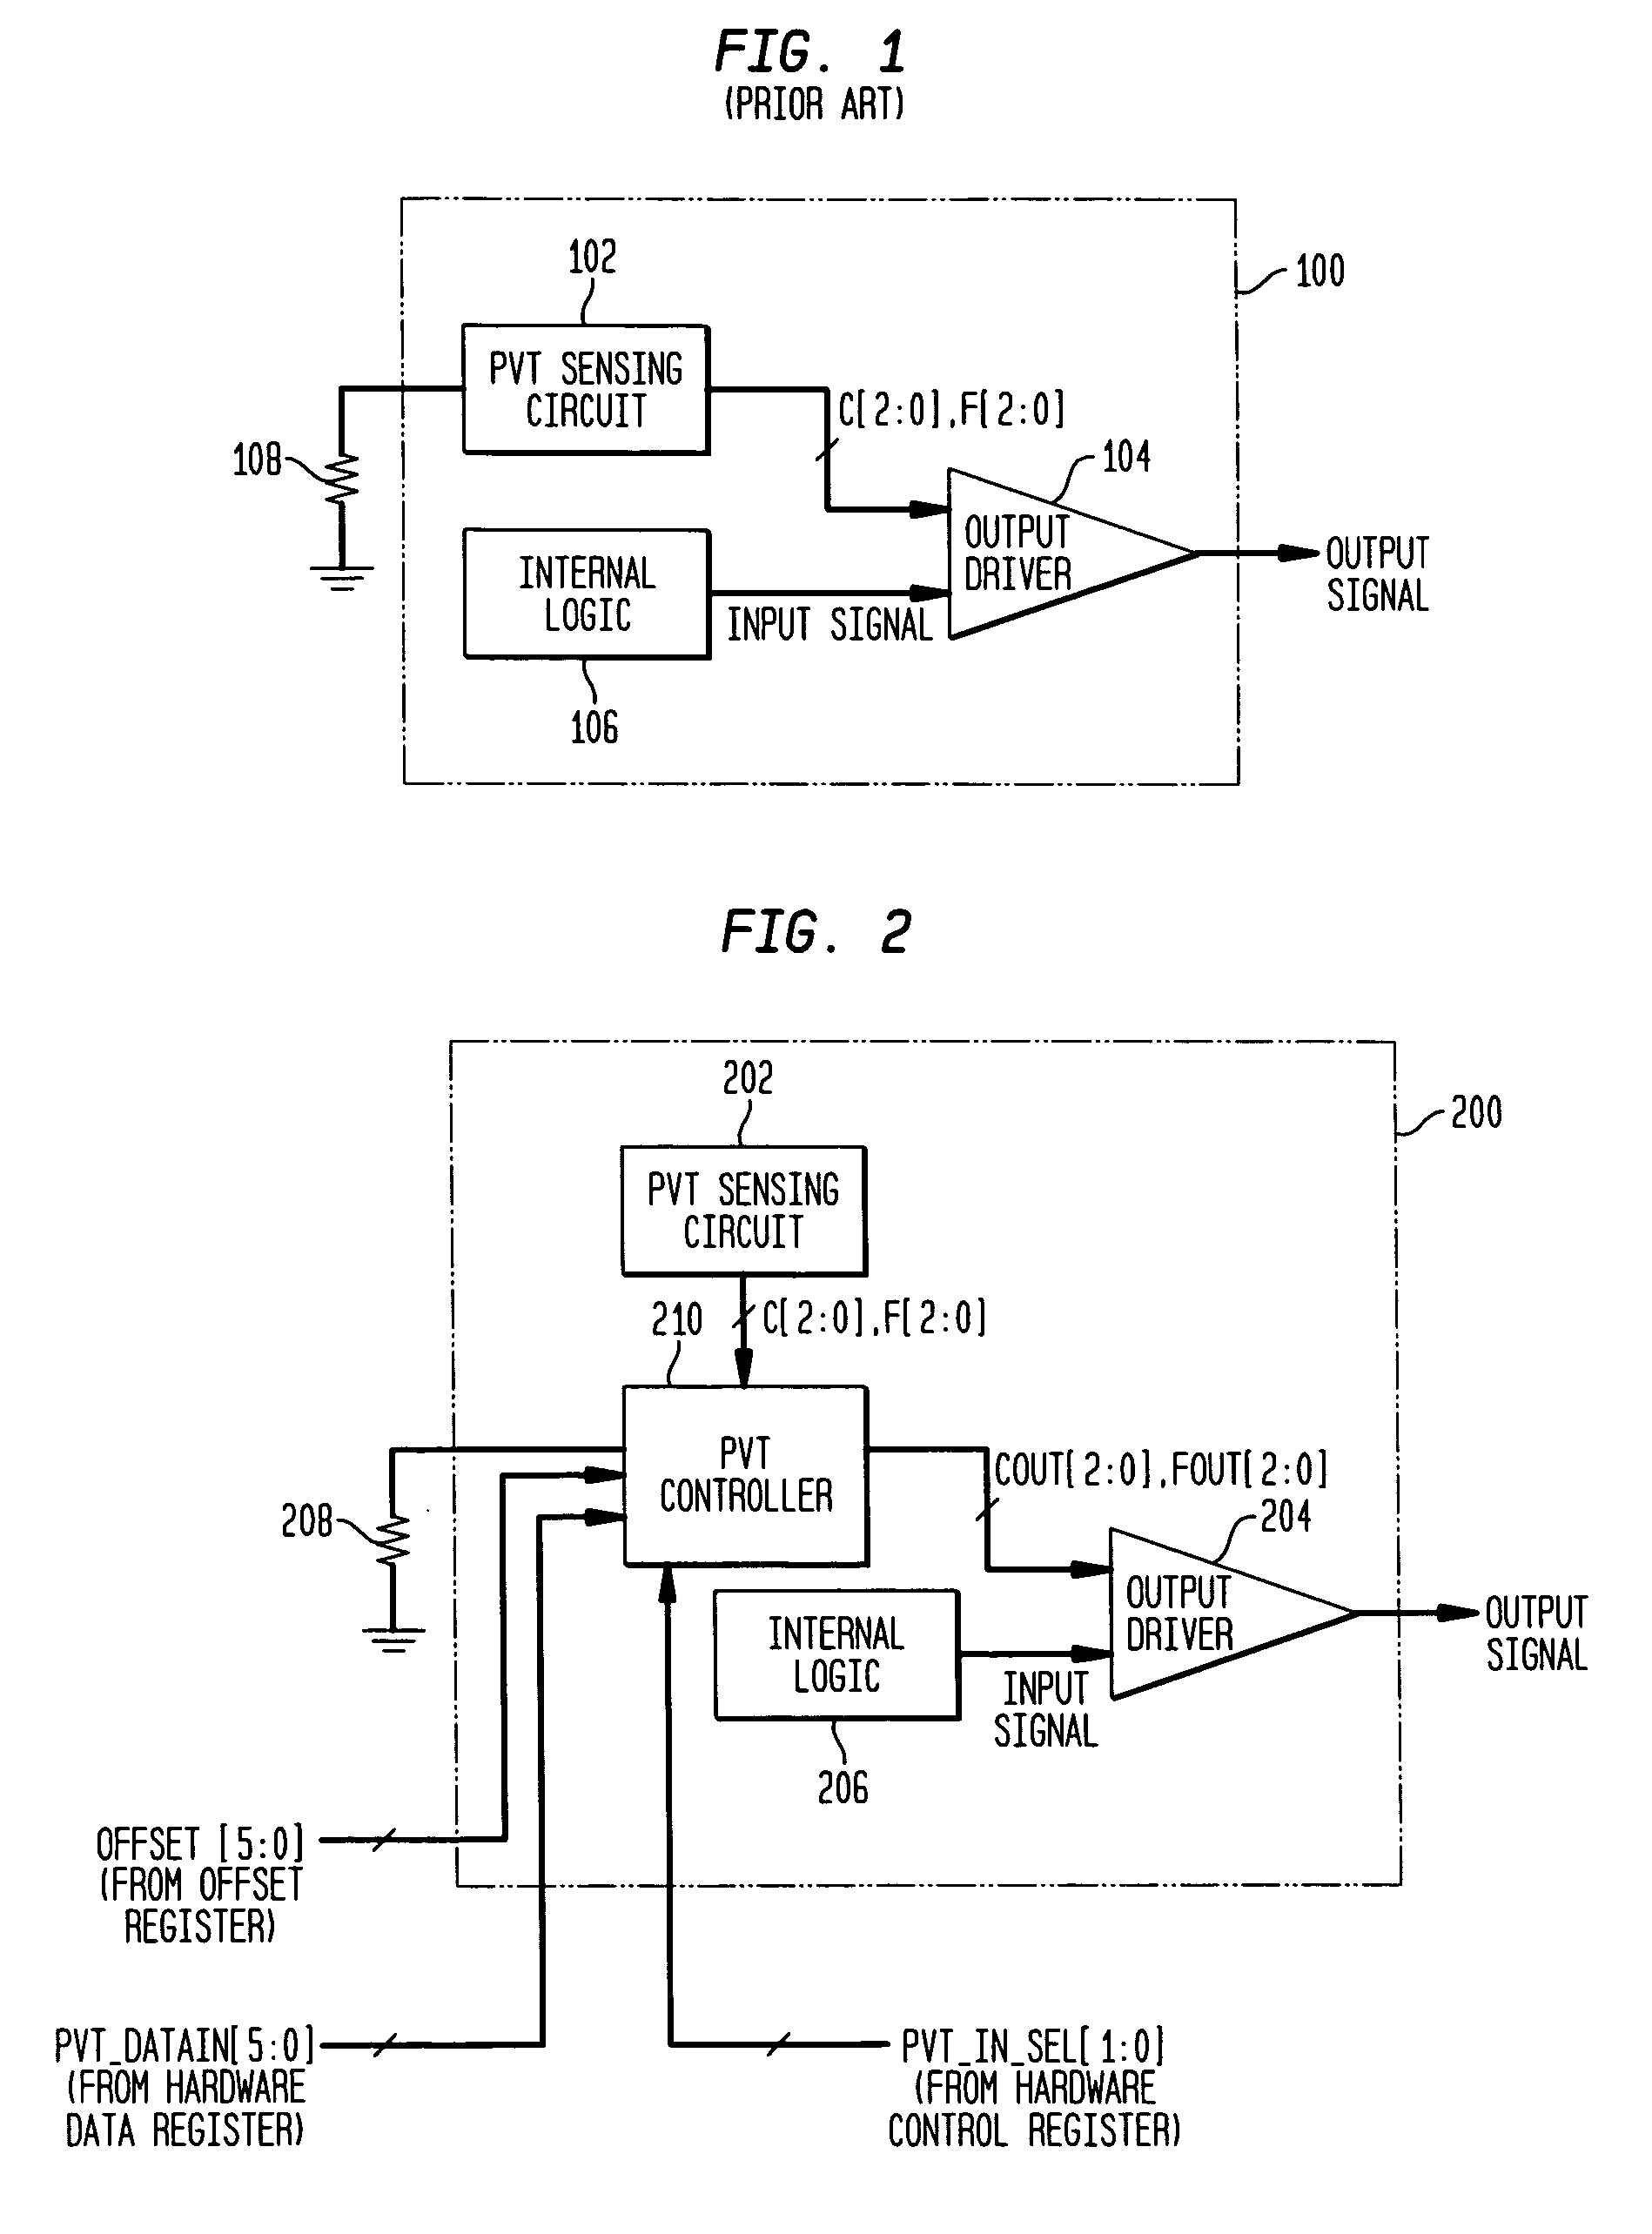 Adjusting settings of an I/O circuit for process, voltage, and/or temperature variations